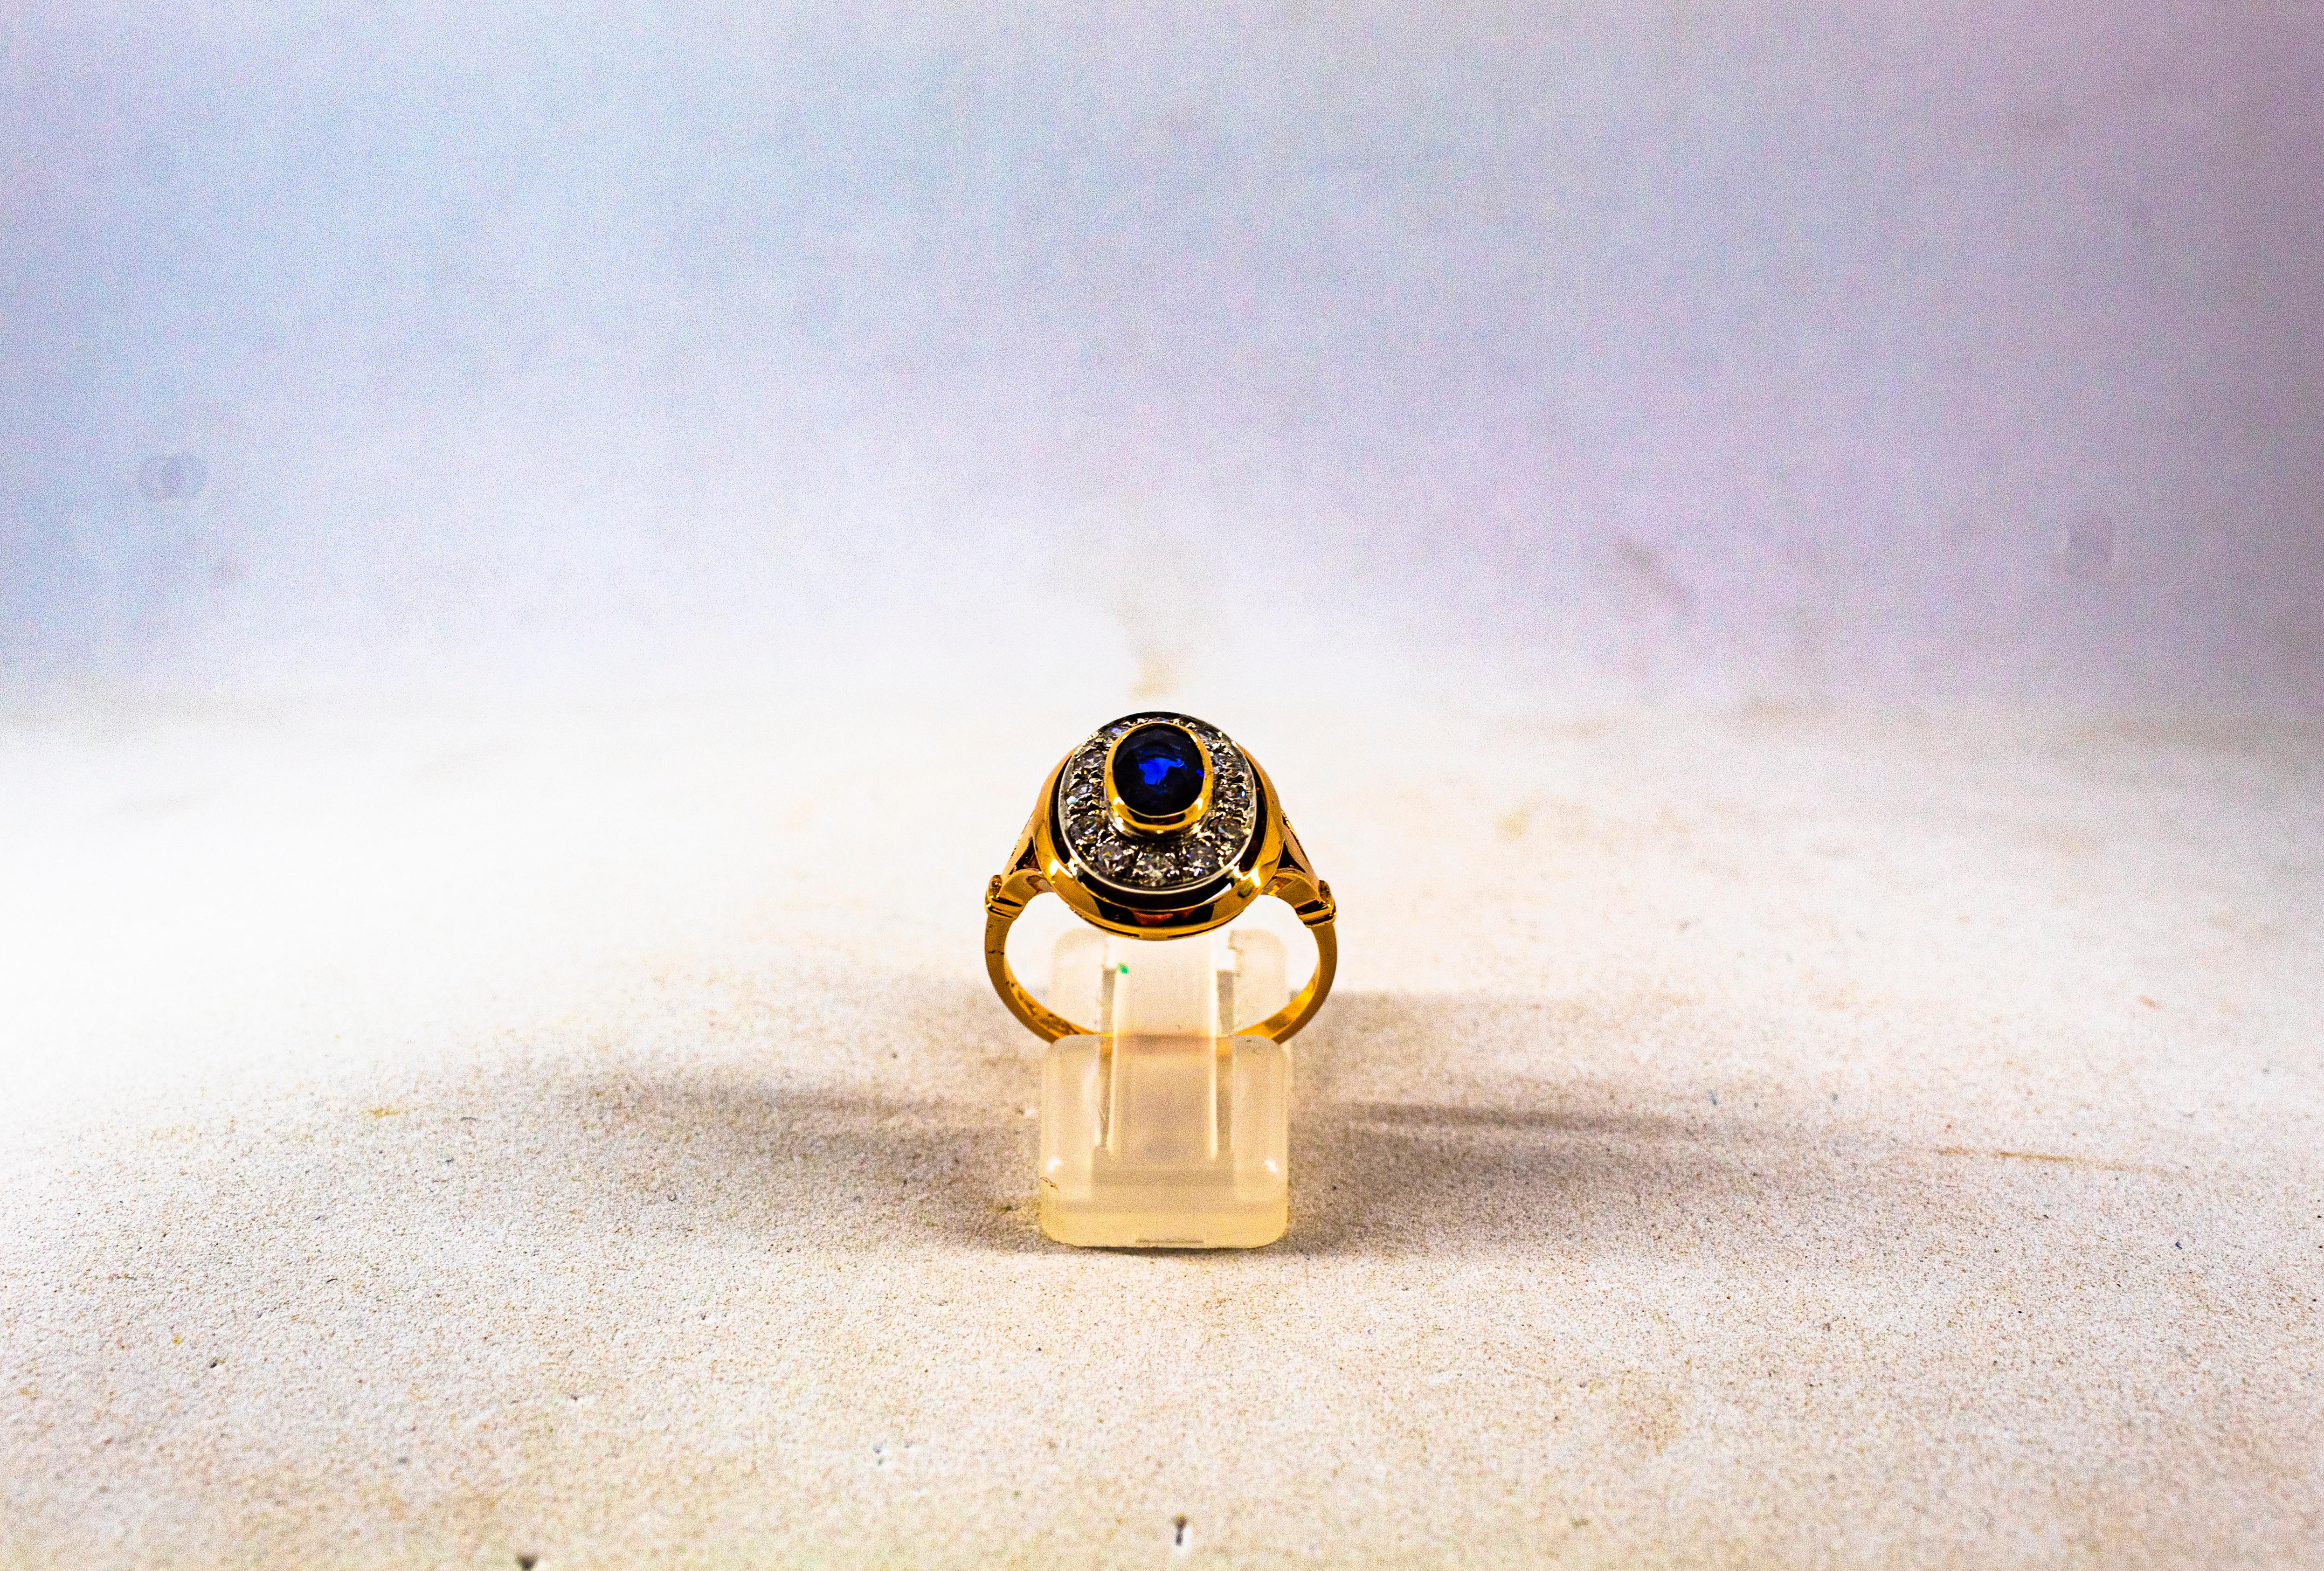 This Ring is made of 9K Yellow Gold and Sterling Silver.
This Ring has 0.30 Carats of White Brilliant Cut Diamonds.
This Ring has a 0.85 Carats Oval Cut Blue Sapphire.

This Ring is available also with a central Ruby or a central Emerald.
This Ring